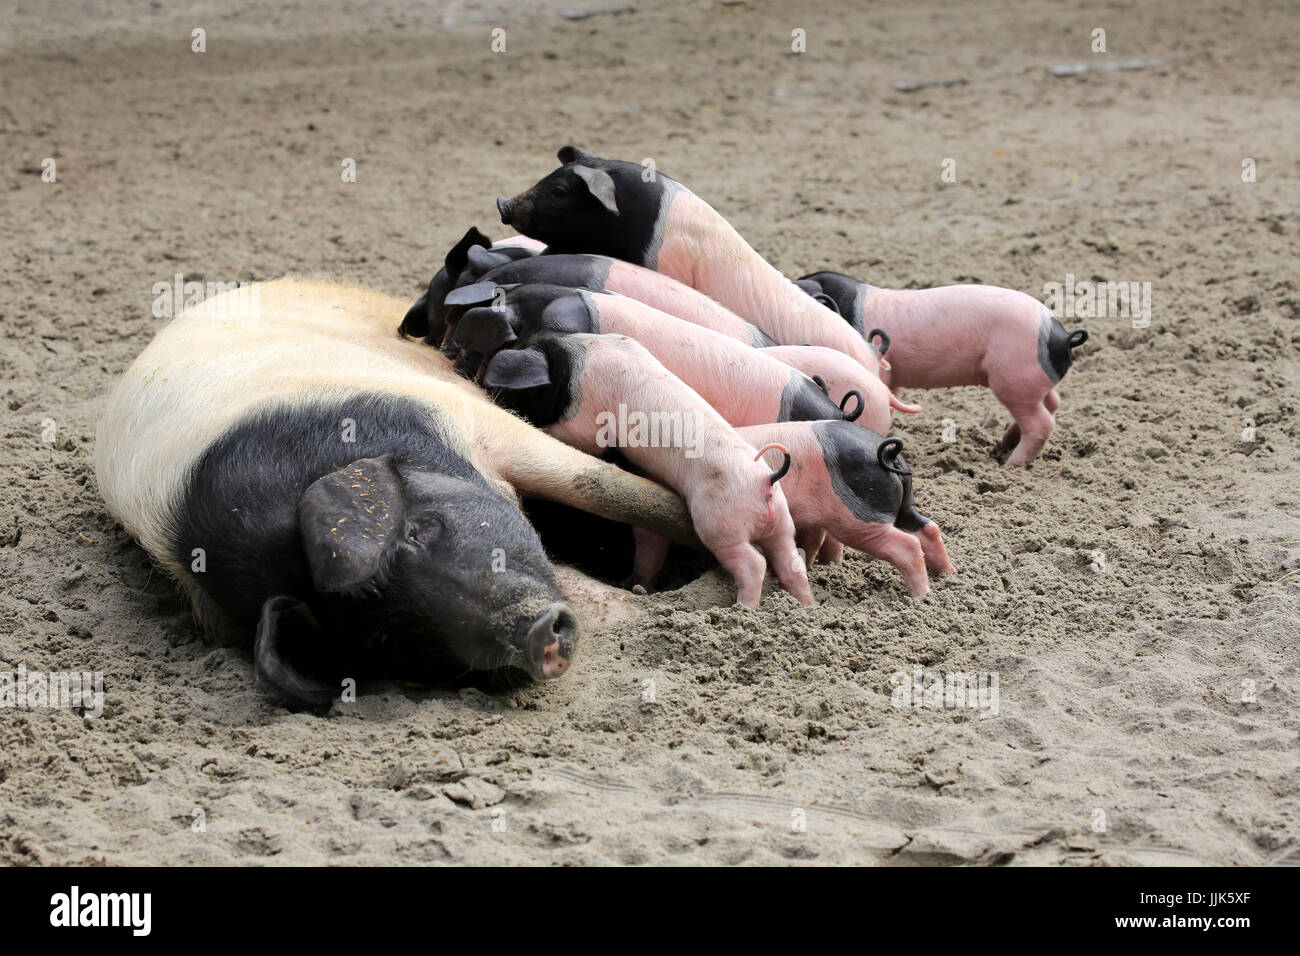 Domestic pig (Sus scrofa domesticus), mother sow suckling piglets, female, young animals, spotted, Germany Stock Photo